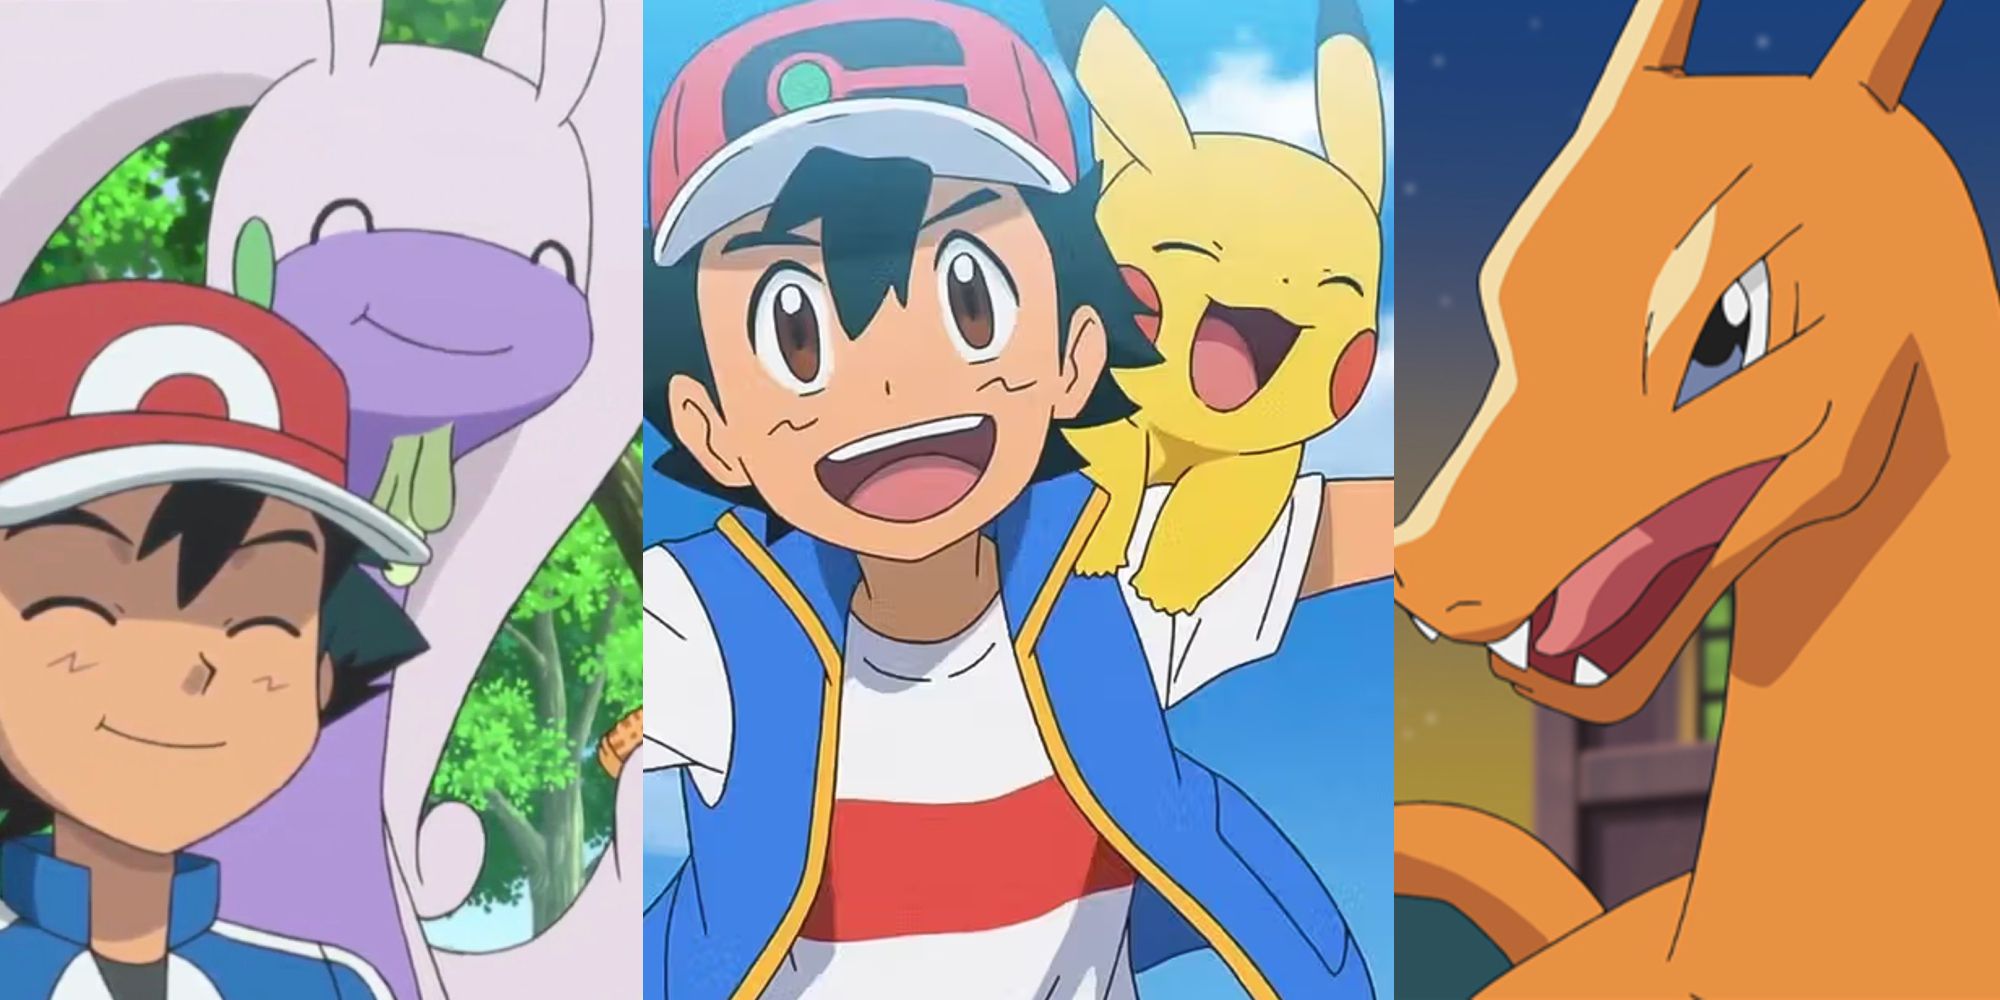 Ash's Pokemon Teams Throughout the Regions 